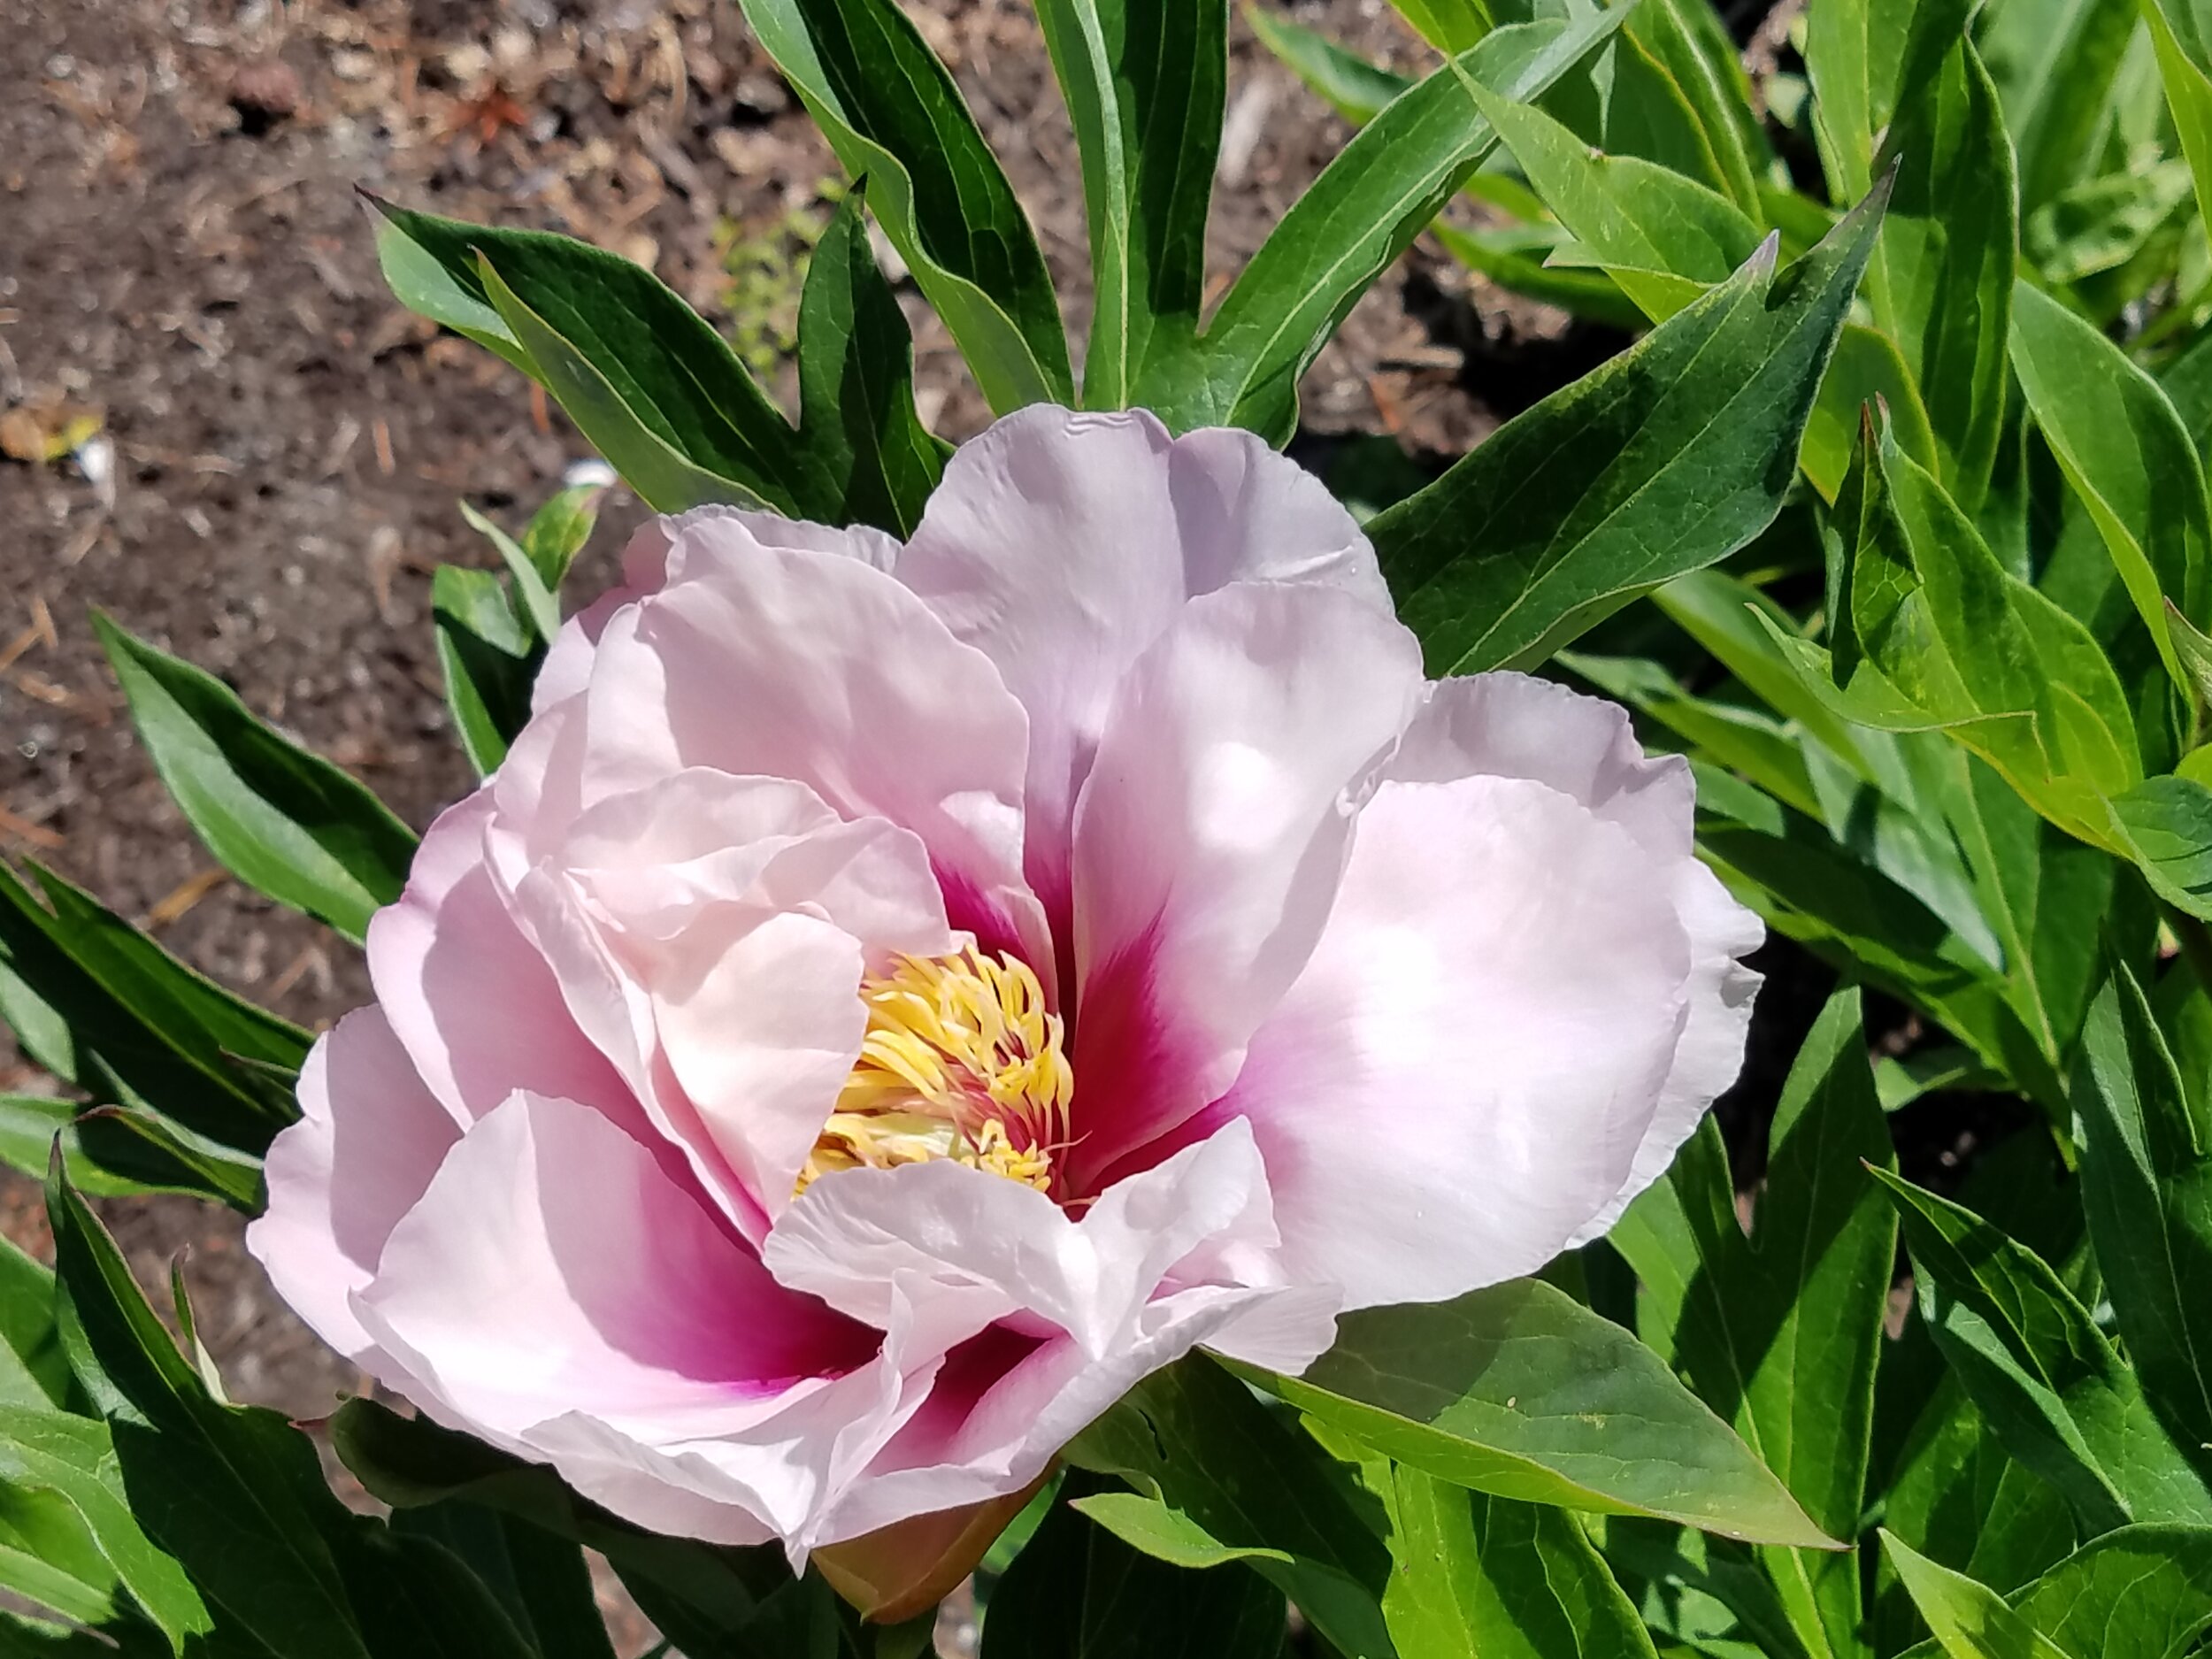  Peony Cora Louise is an Itoh variety that when mature will have approximately 50 blooms. It blooms in late spring and gets to be about 3 feet tall. 